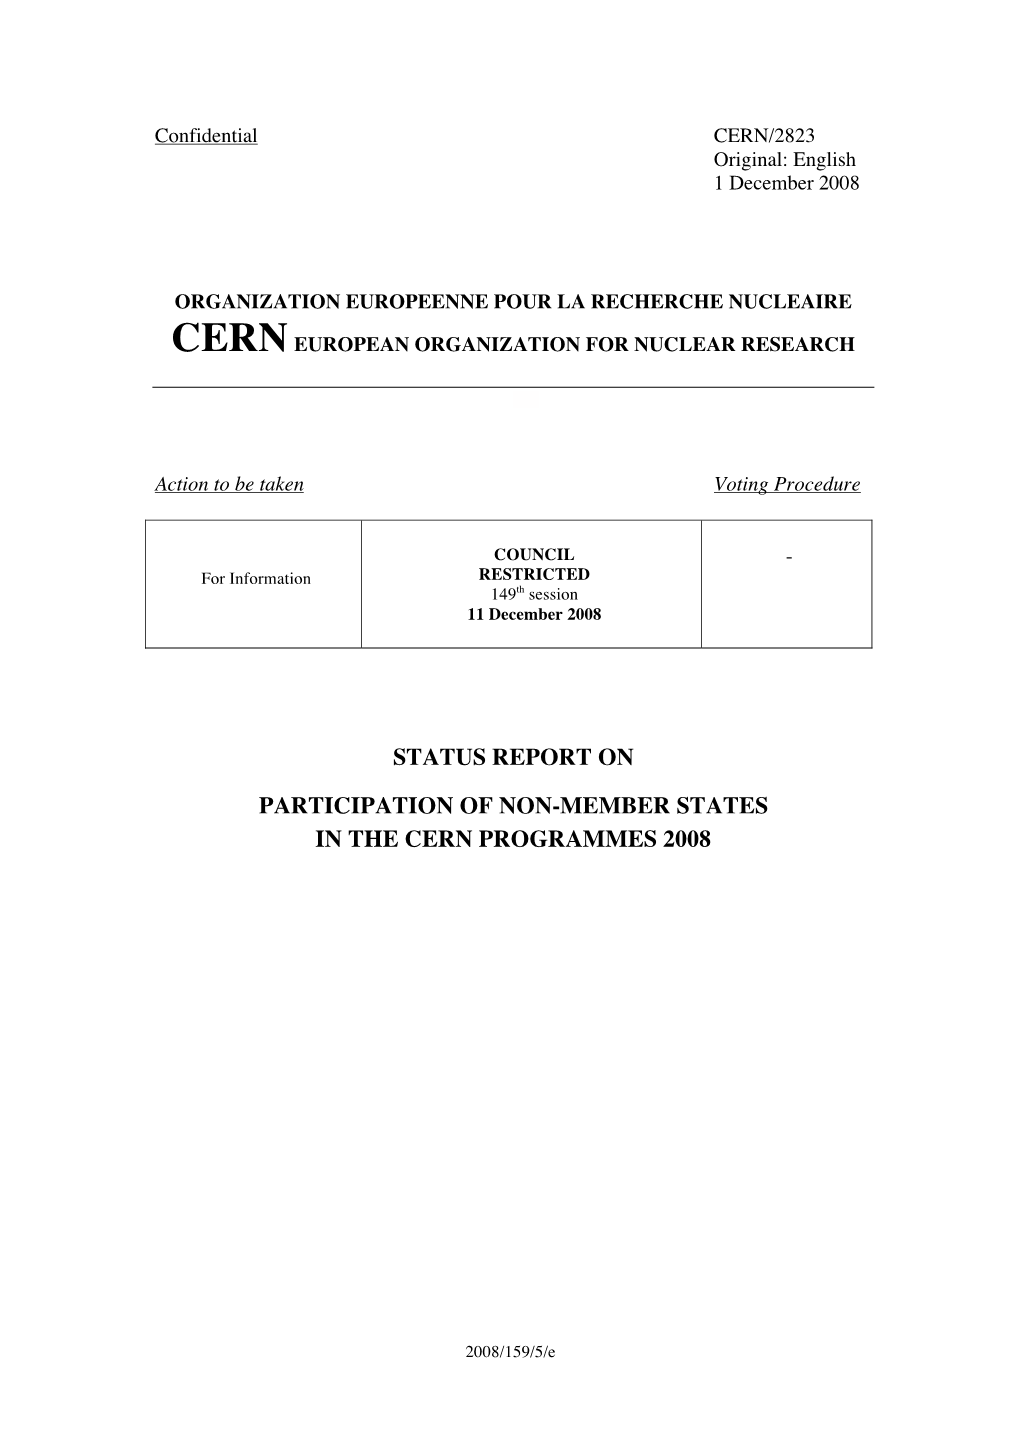 Status Report on Participation of Non-Member States in the Cern Programmes 2008